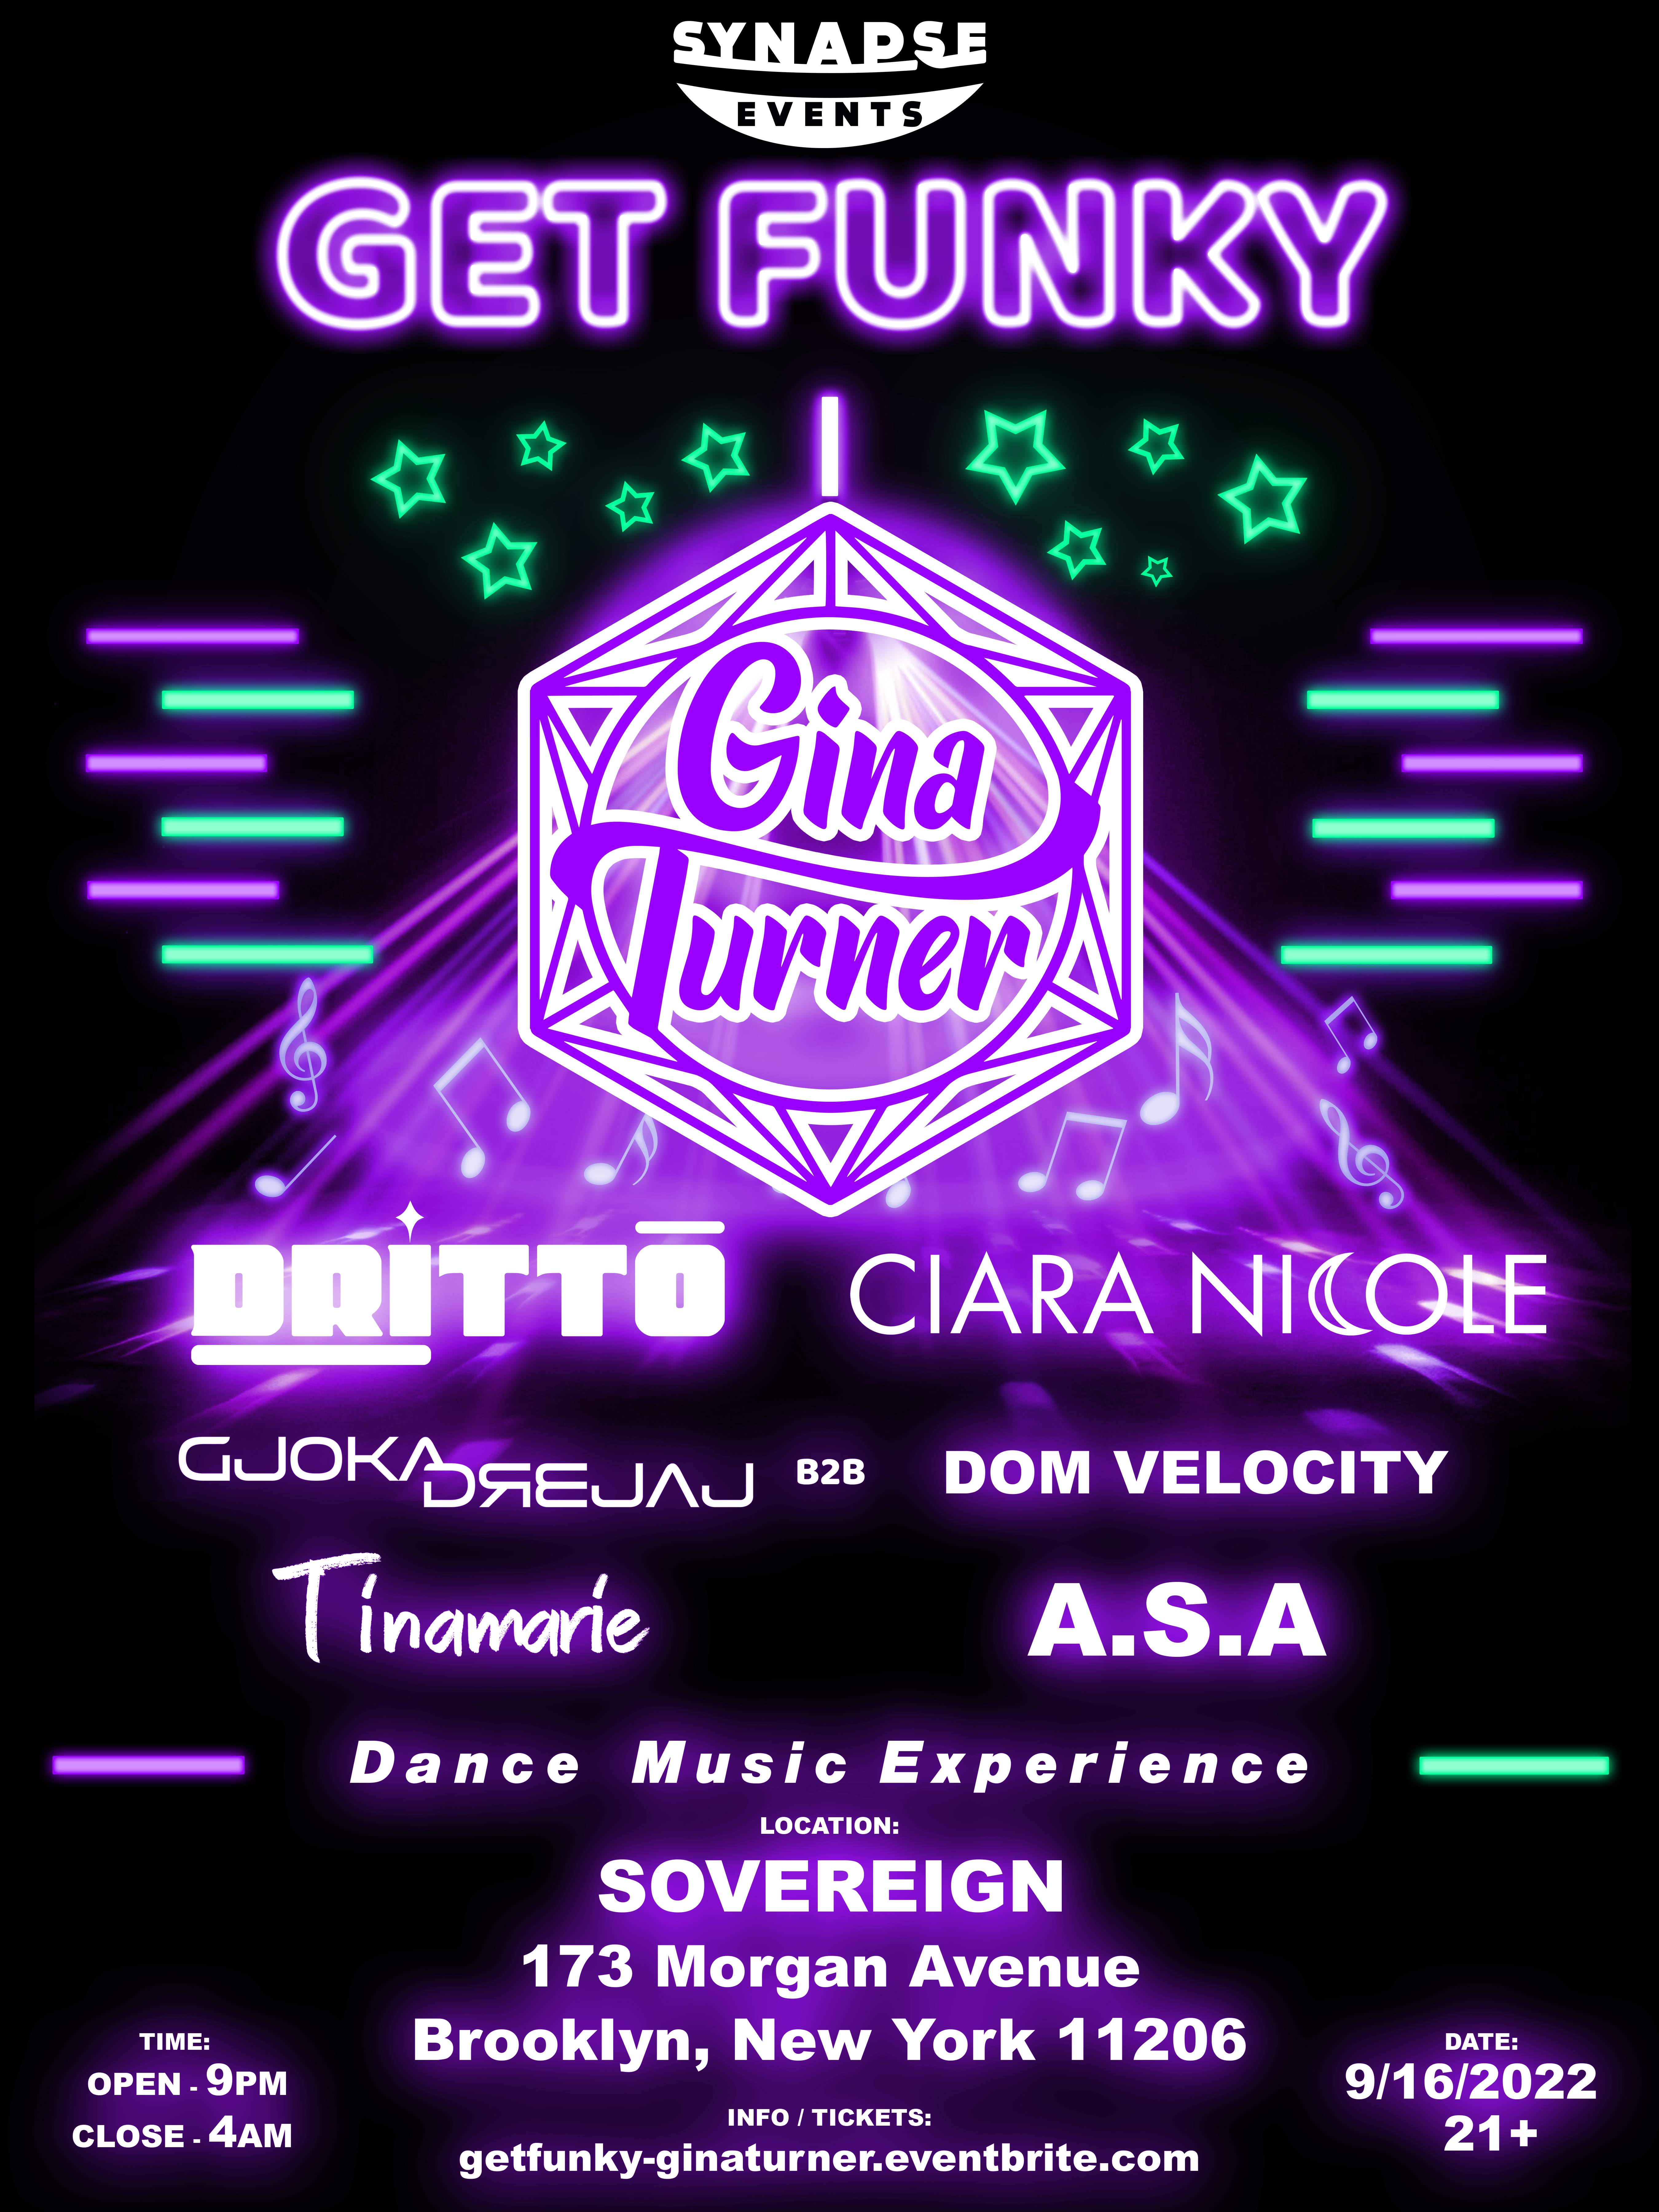 GET FUNKY with Gina Turner, DRITTO, Ciara Nicole  - フライヤー表